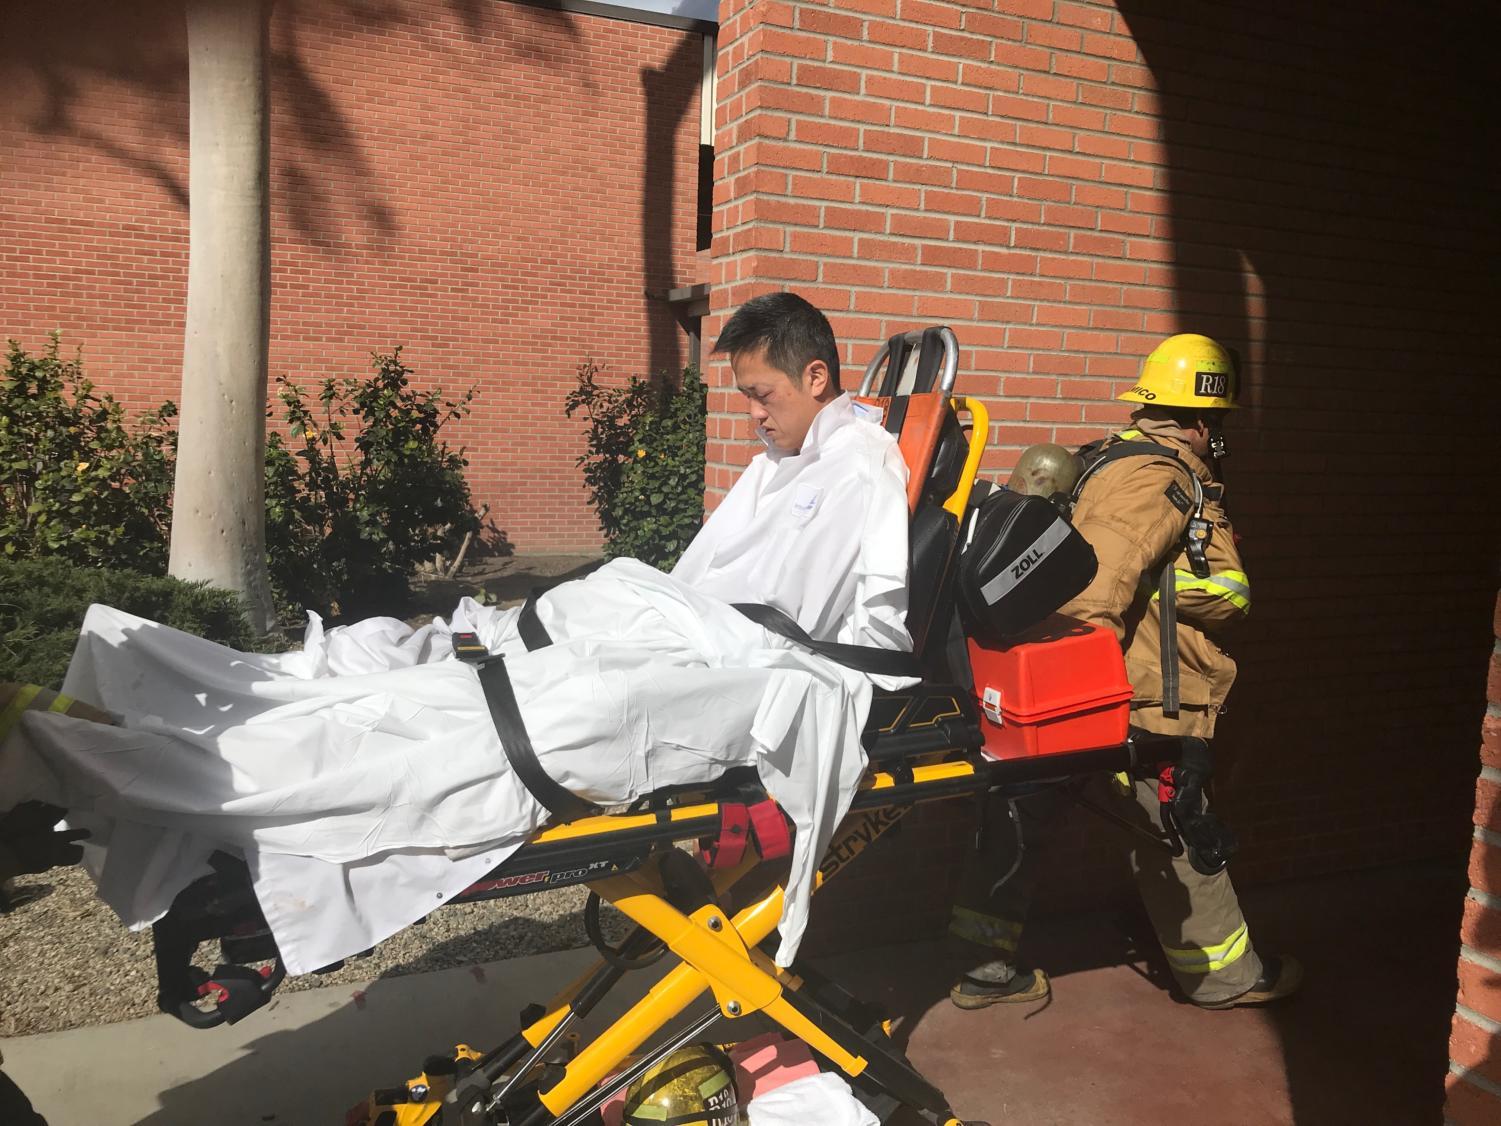 Assistant Professor of Chemical Engineering Ted Yu is wheeled out on a stretcher after sustaining injuries during a fire. Two engineering buildings were evacuated Tuesday after a chemical reaction sparked a fire in the Engineering and Computer Sciences building.